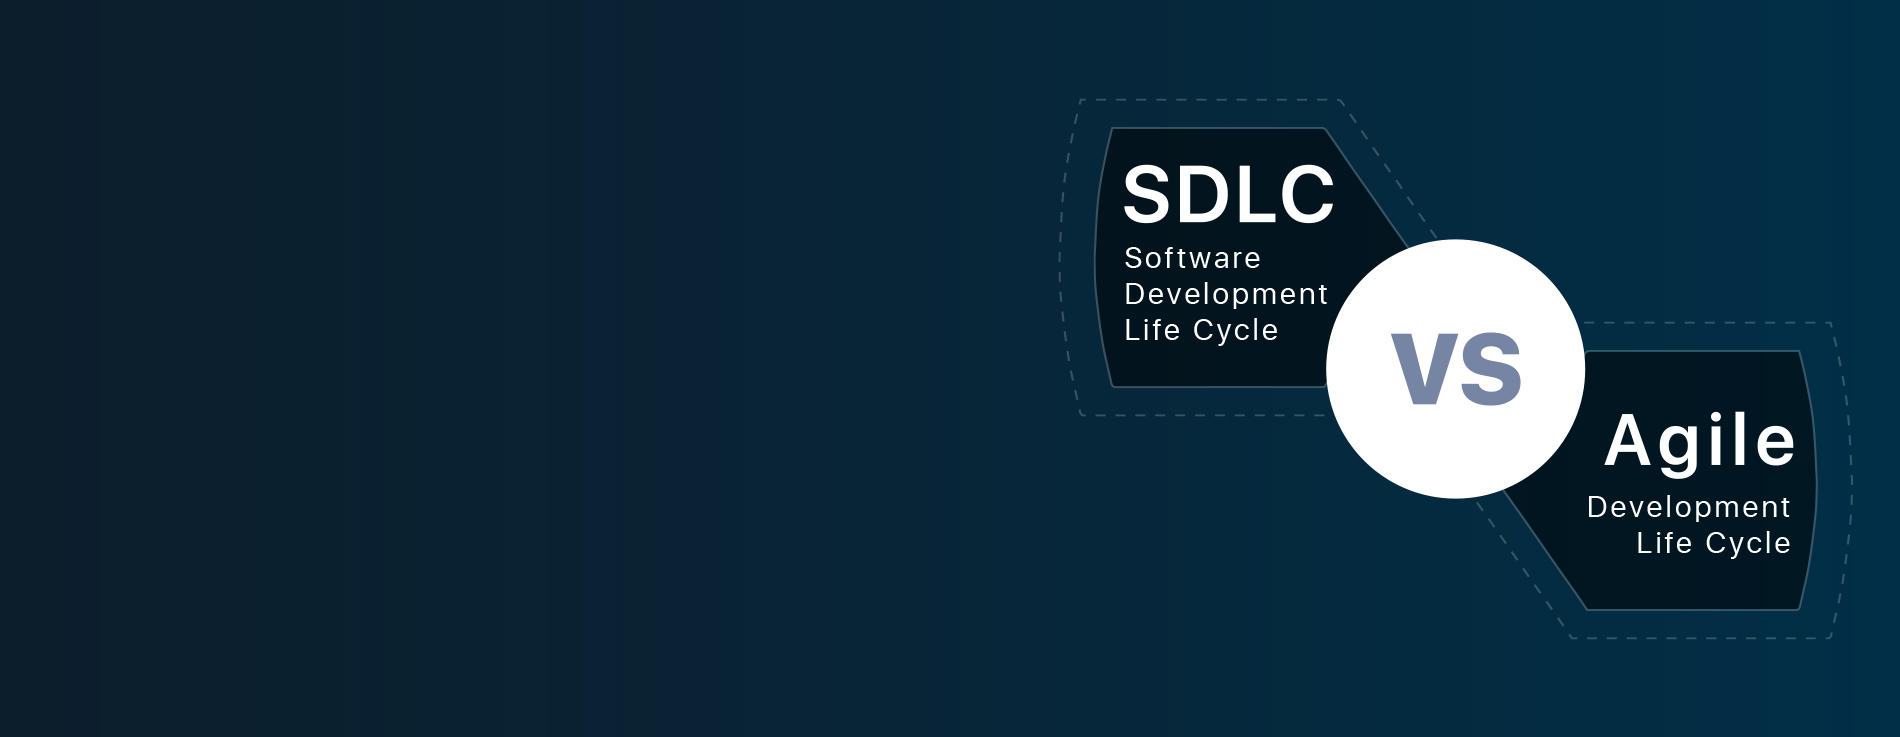 Difference between Agile and SDLC